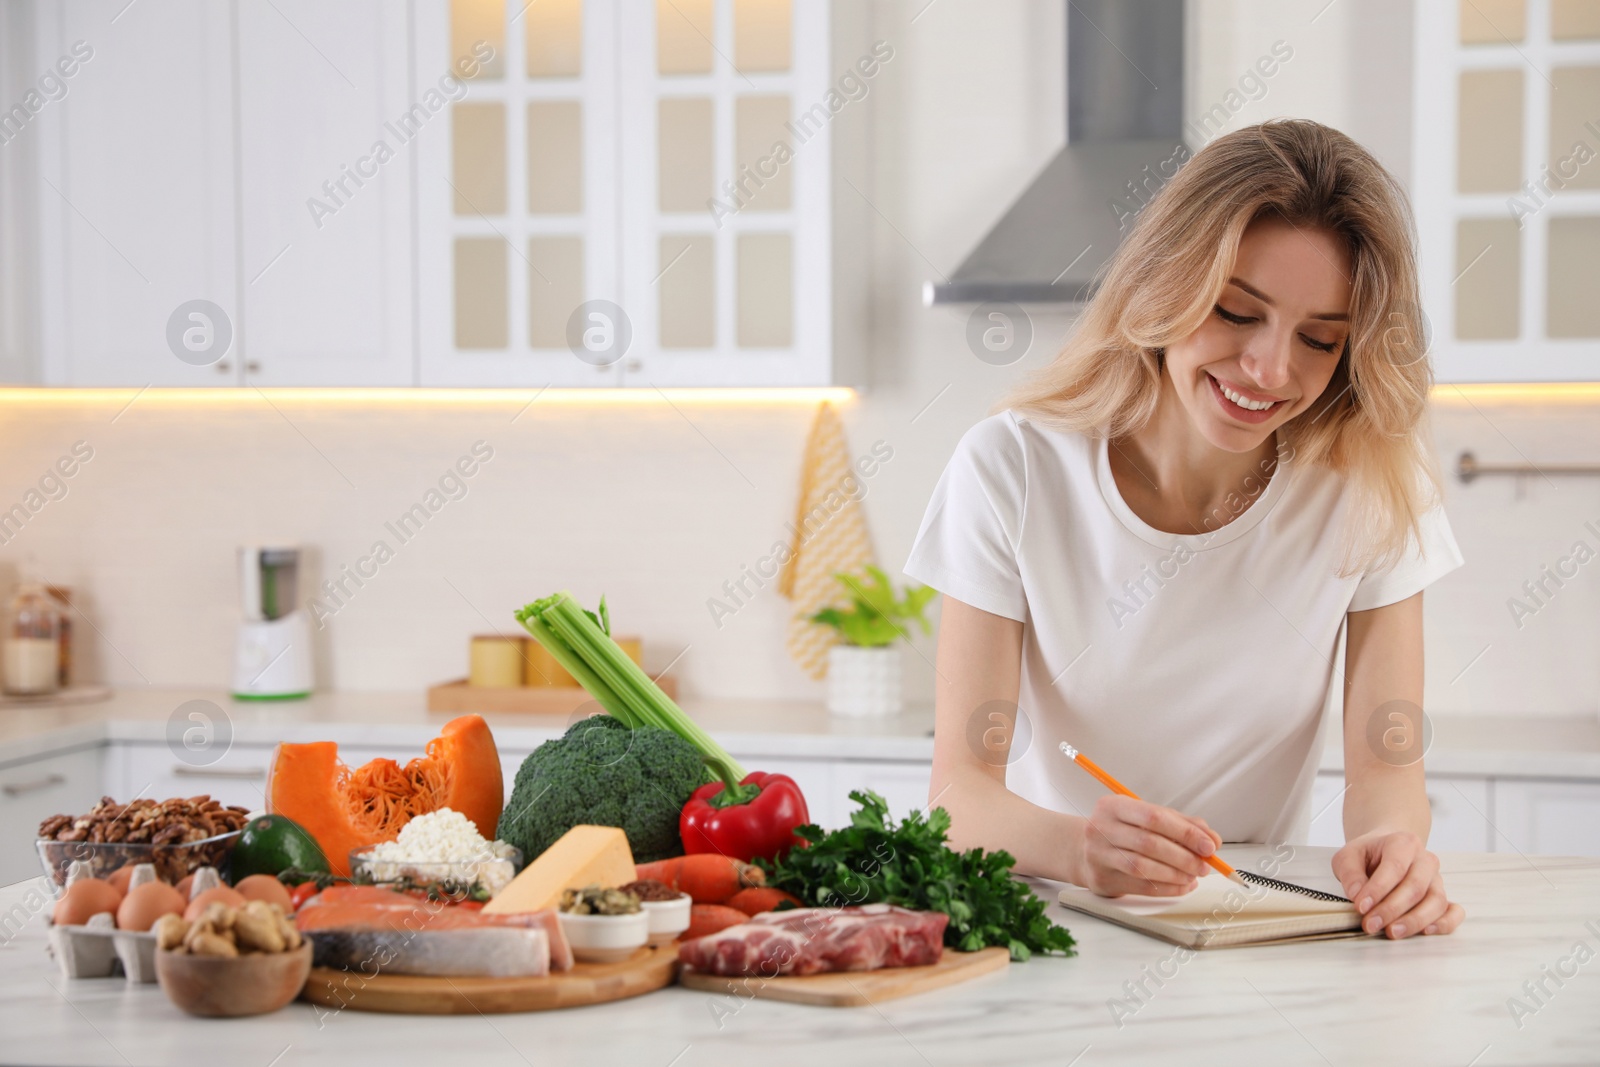 Photo of Woman with notebook and healthy food at white table in kitchen. Keto diet